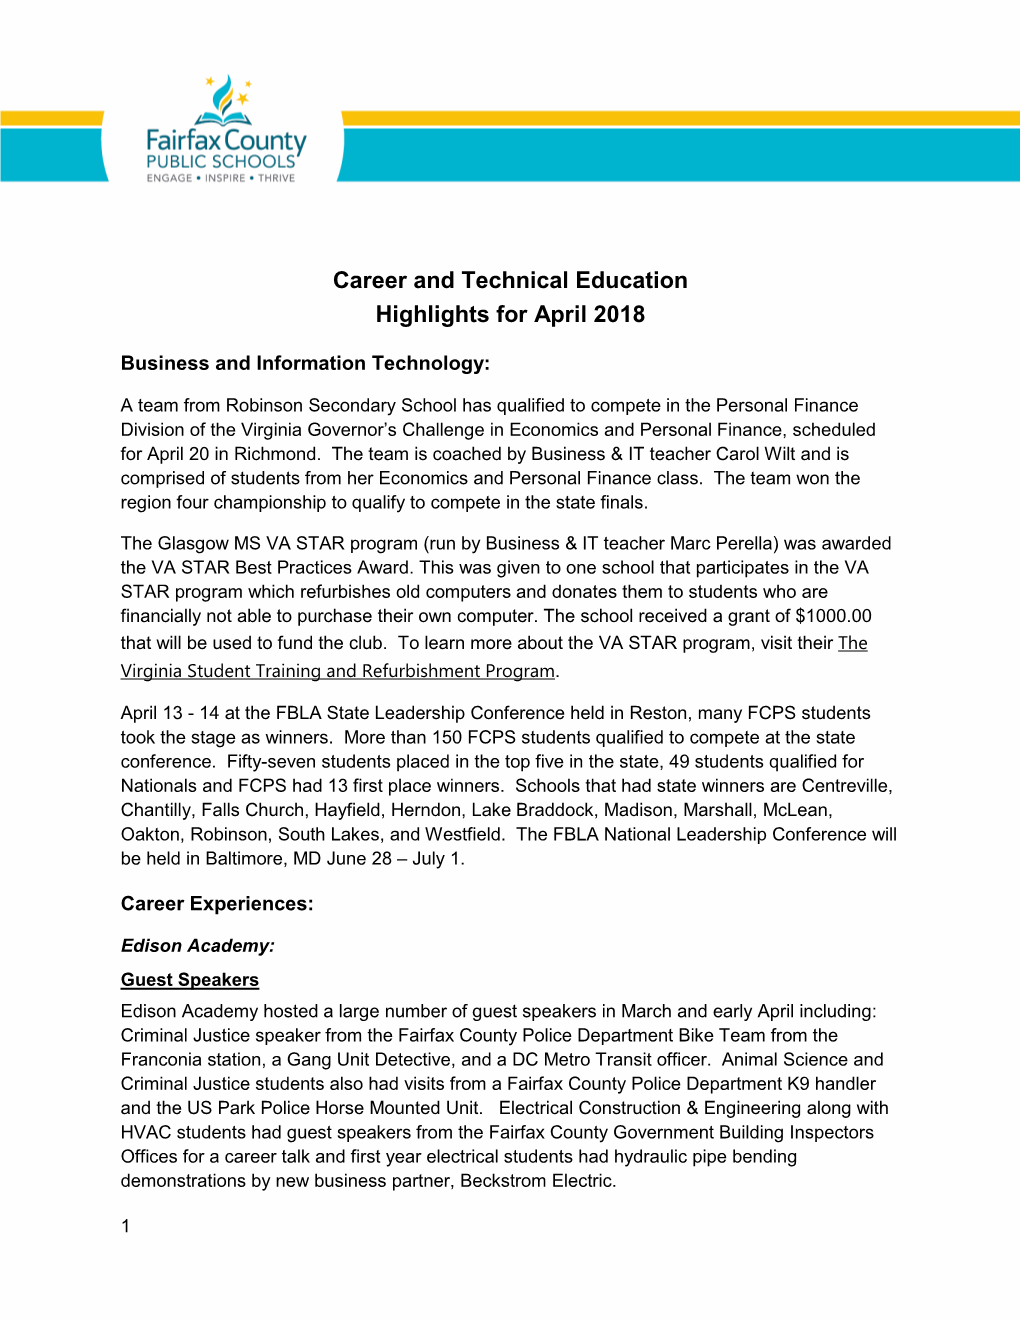 Career and Technical Education Highlights for April 2018